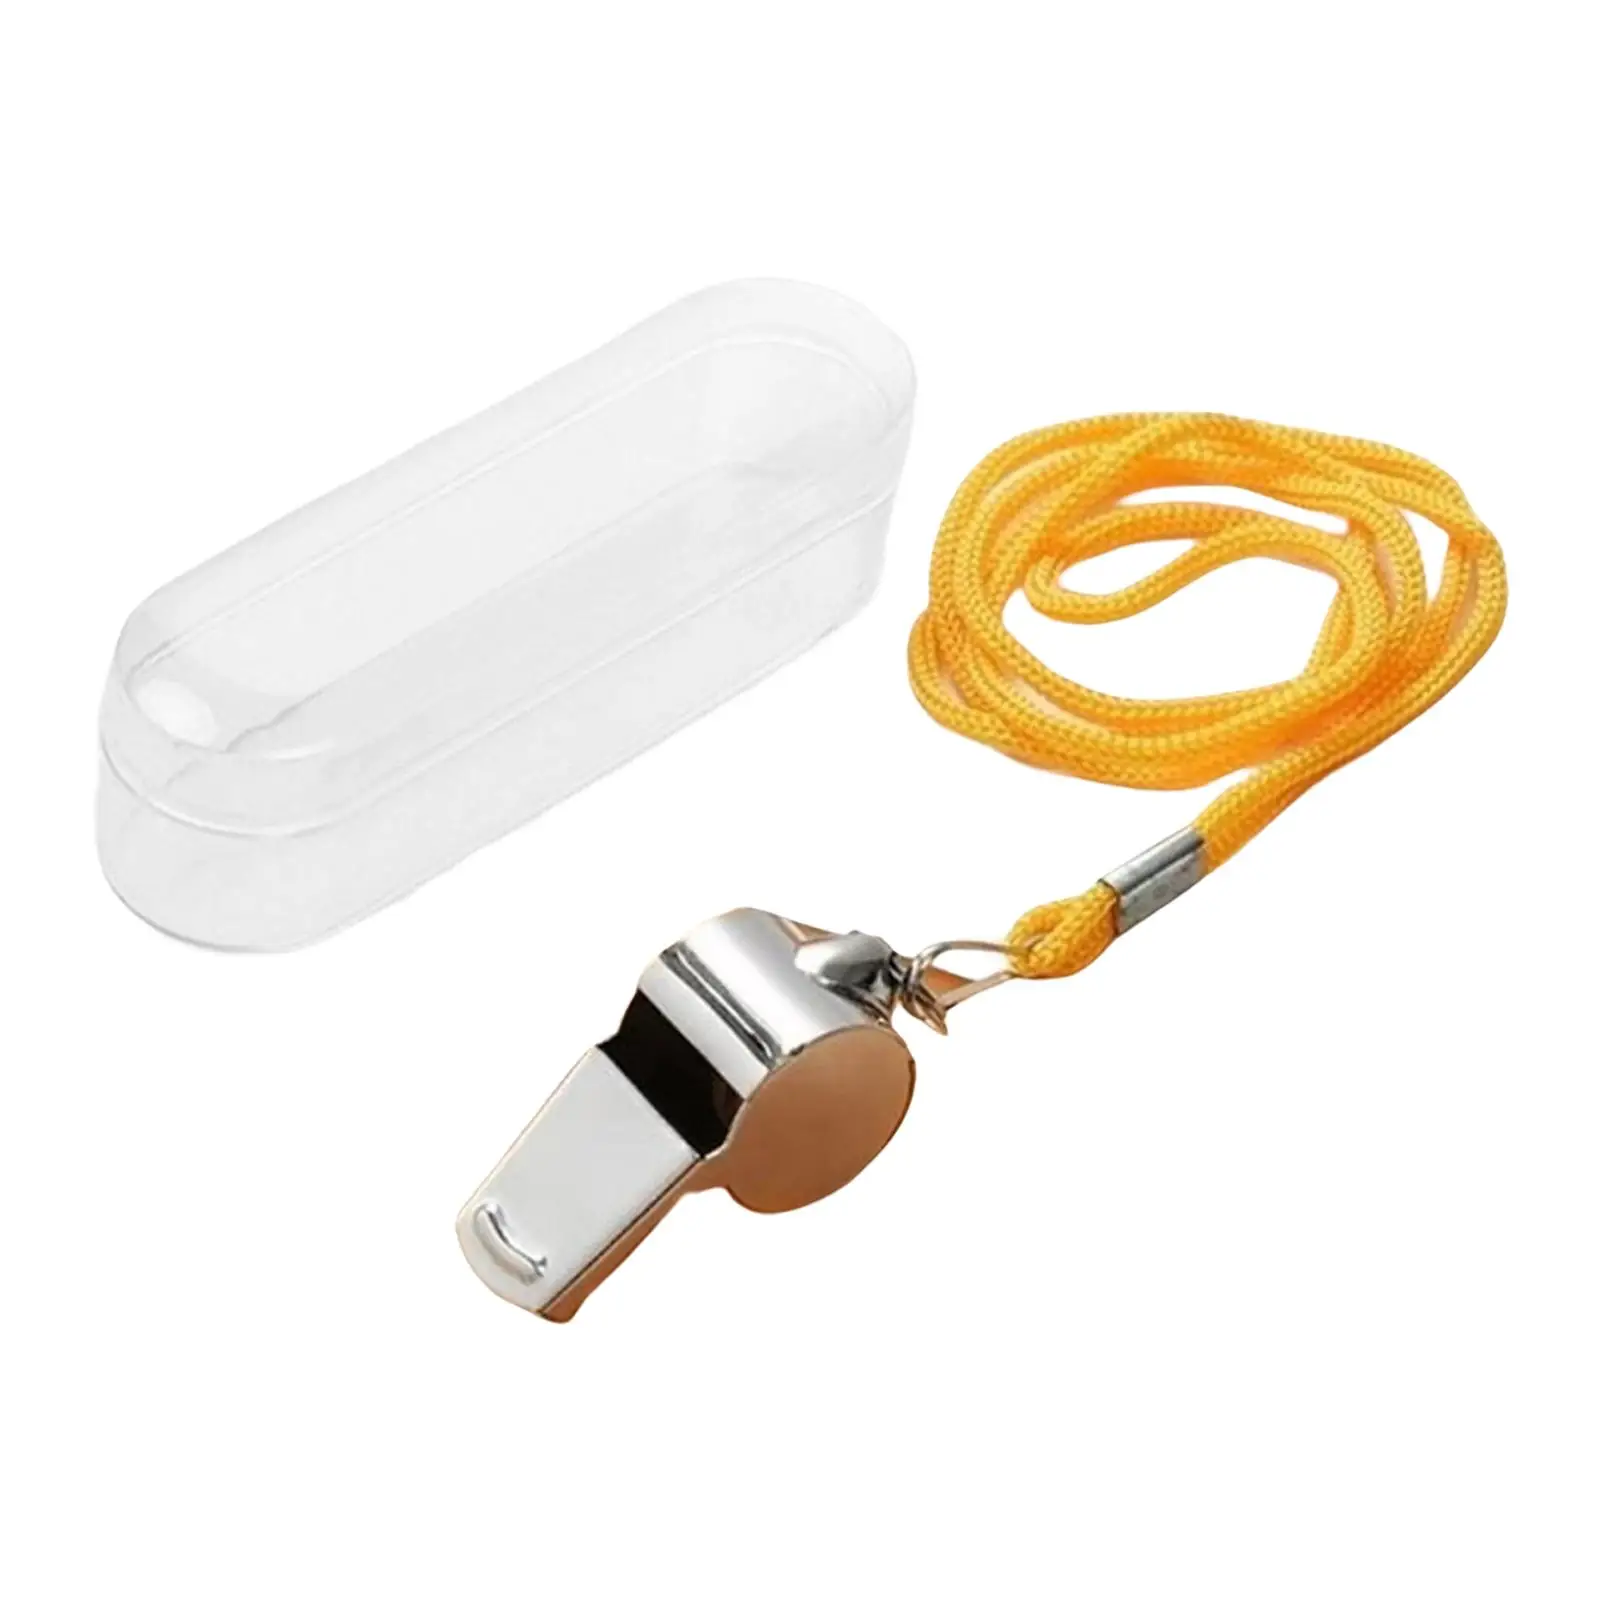 Sports Whistles with Lanyard Loud Crisp Sound Referee Whistle for Dog Training Survival